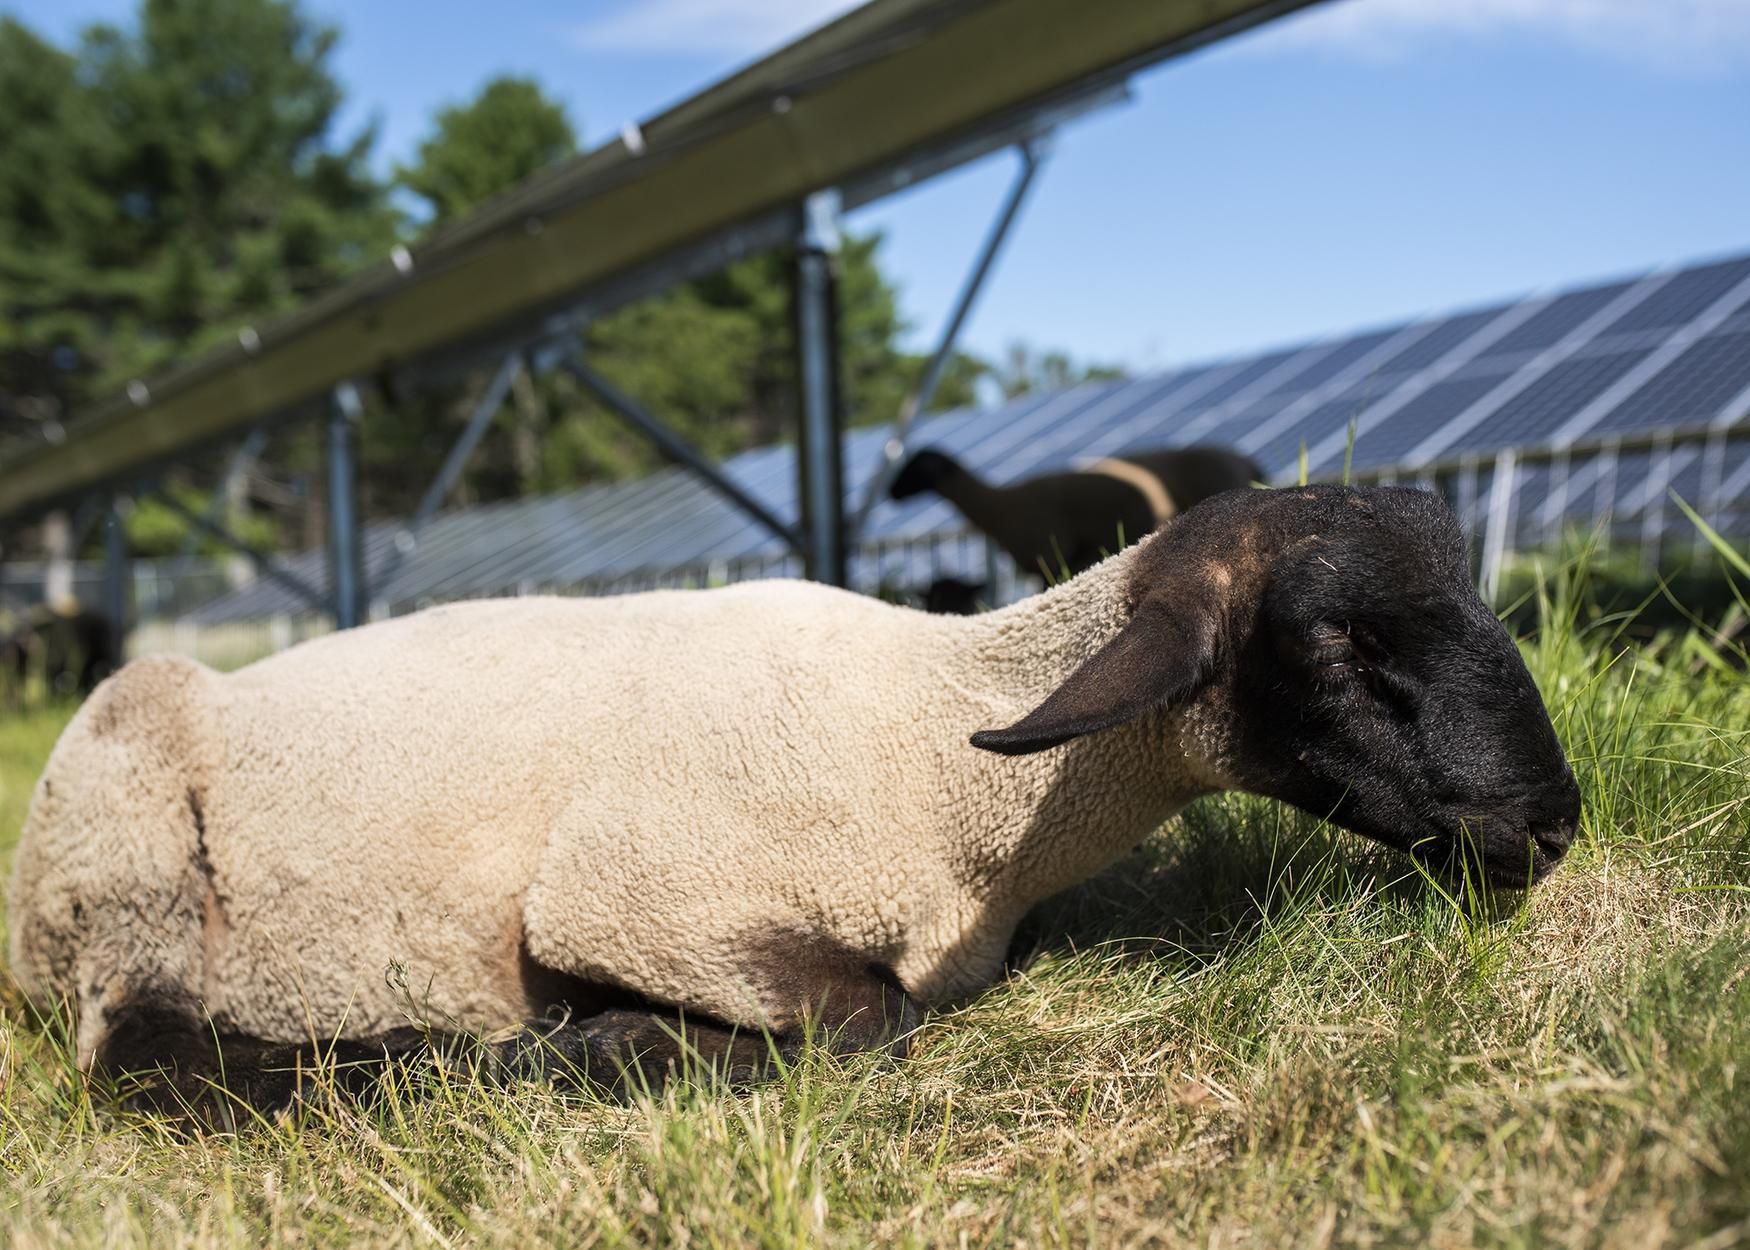 Sheep graze among the solar panels at Mendon Community Solar Farm, managing the site&apos;s vegetation in lieu of a traditional mowing system on Thursday. [T&G Staff/Ashley Green]